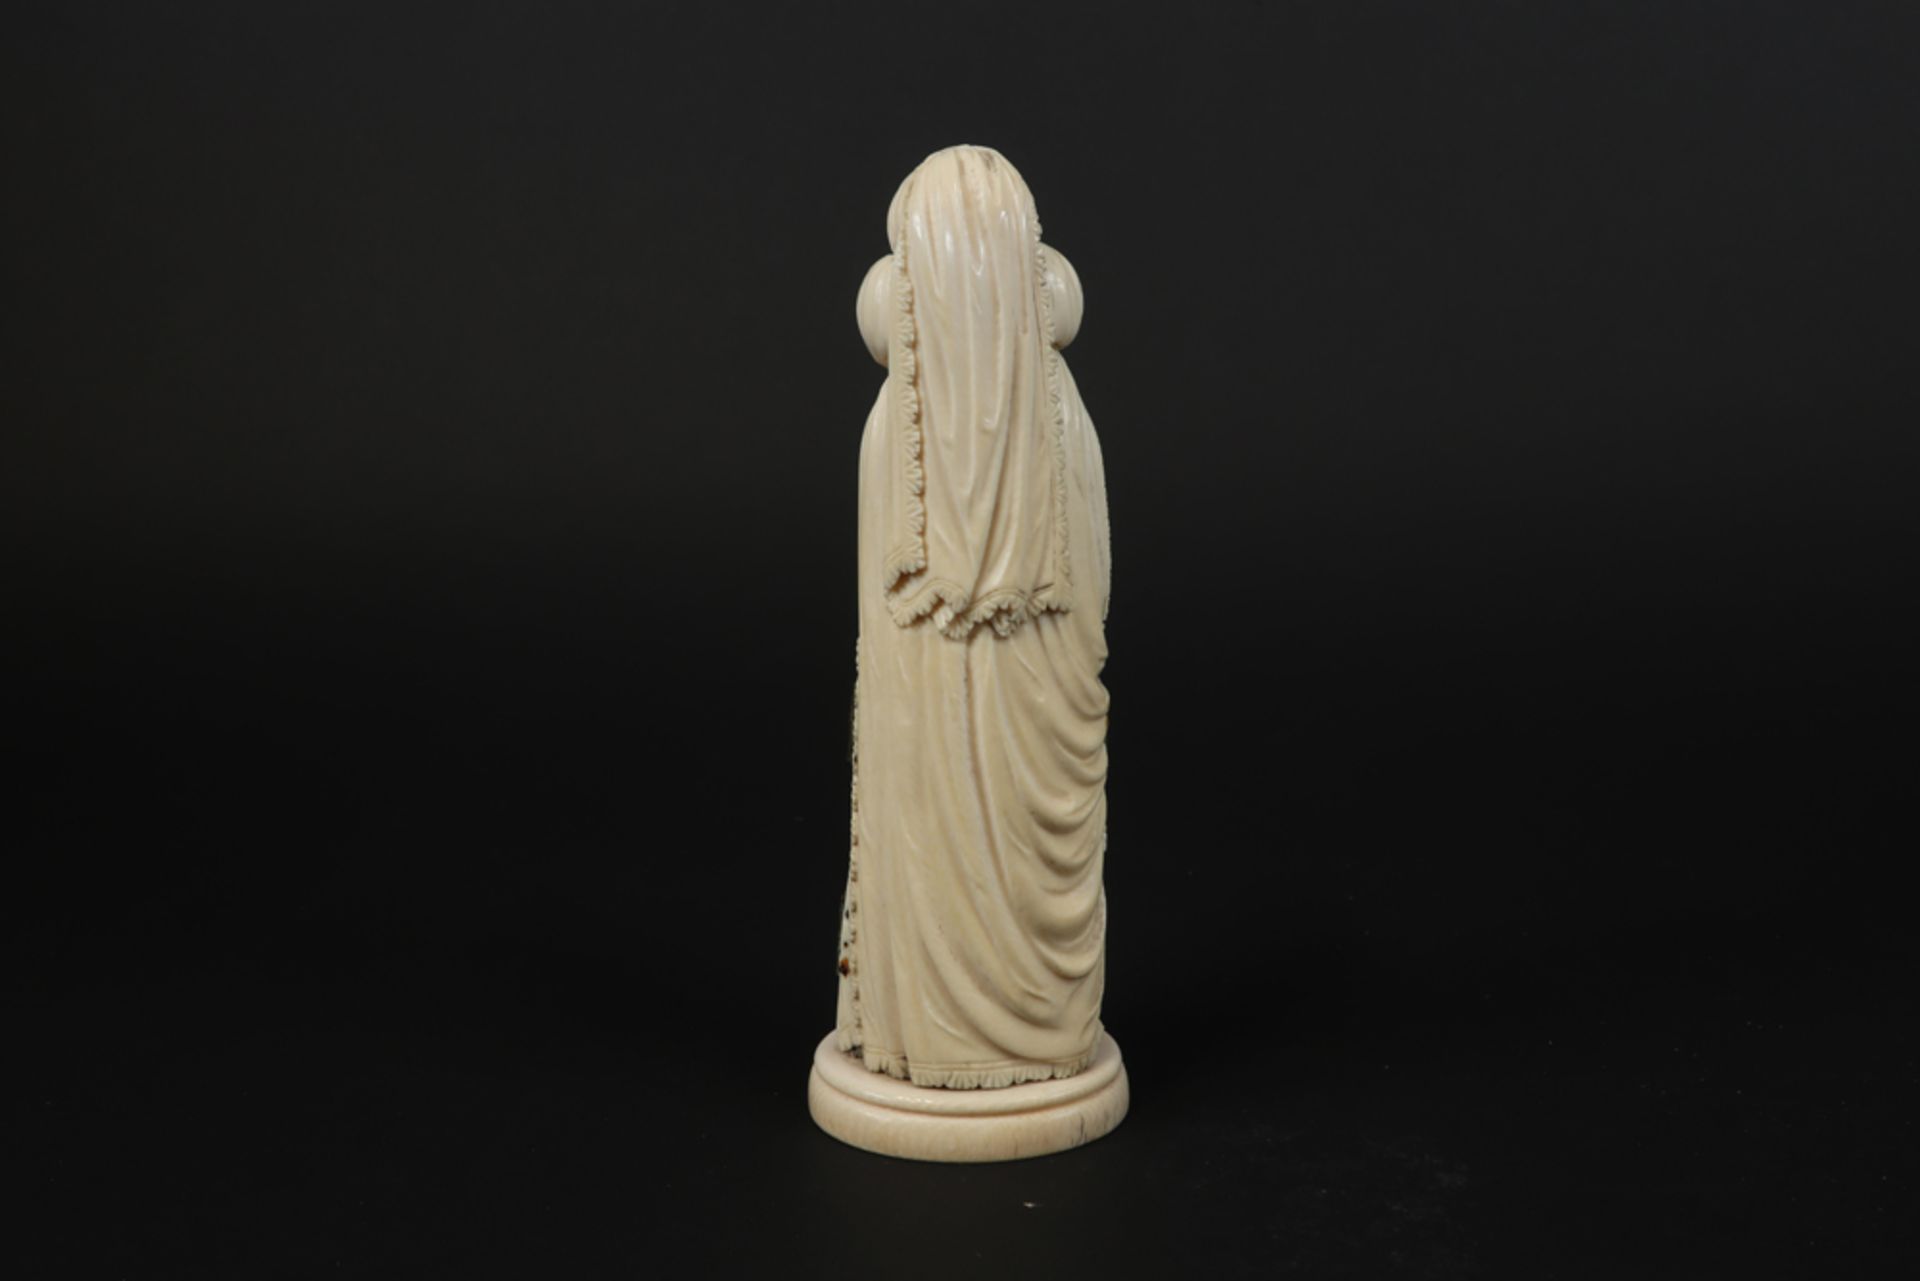 19th Cent European, presumably German, sculpture in ivory depicting Mary Stuart (queen of Scots) , - Image 4 of 8